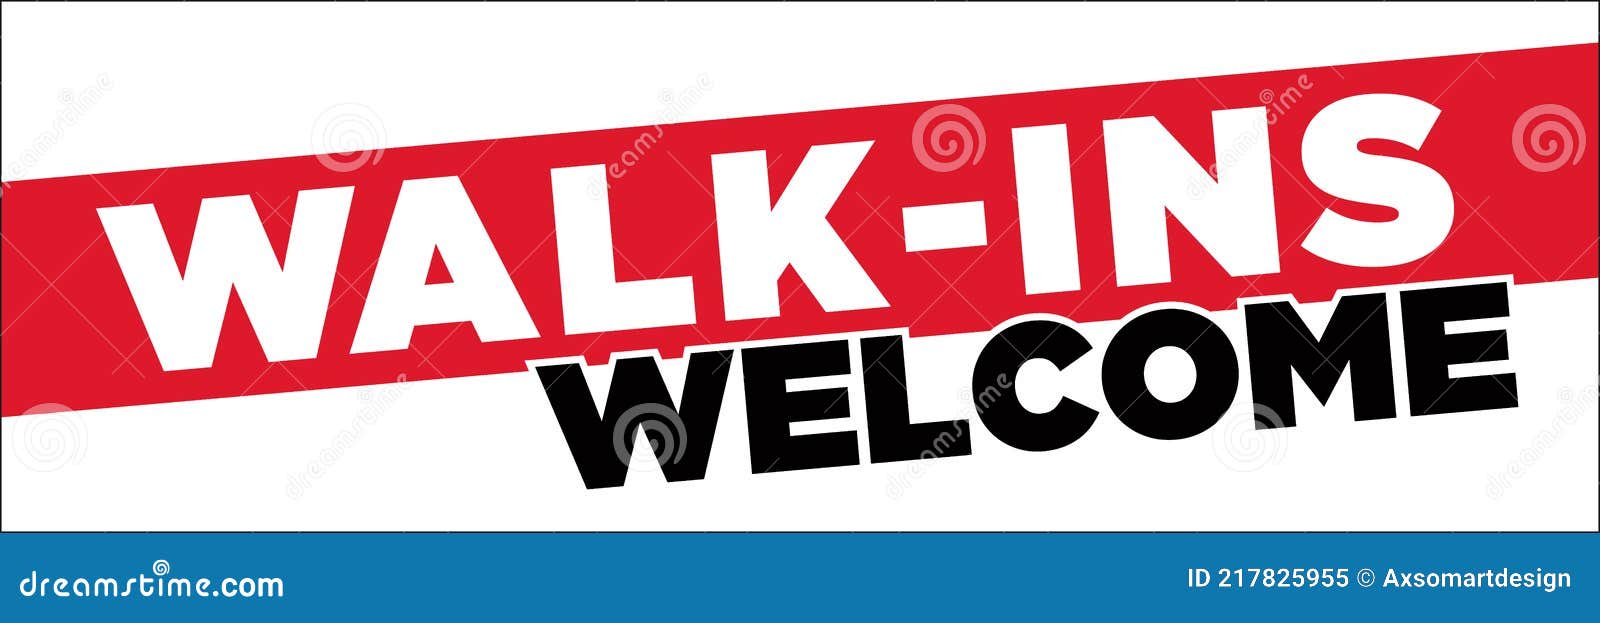 walk-ins welcome banner 24in x 72in sign for restaurants, salons, barber shops, vaccination sites, emergency care centers & more